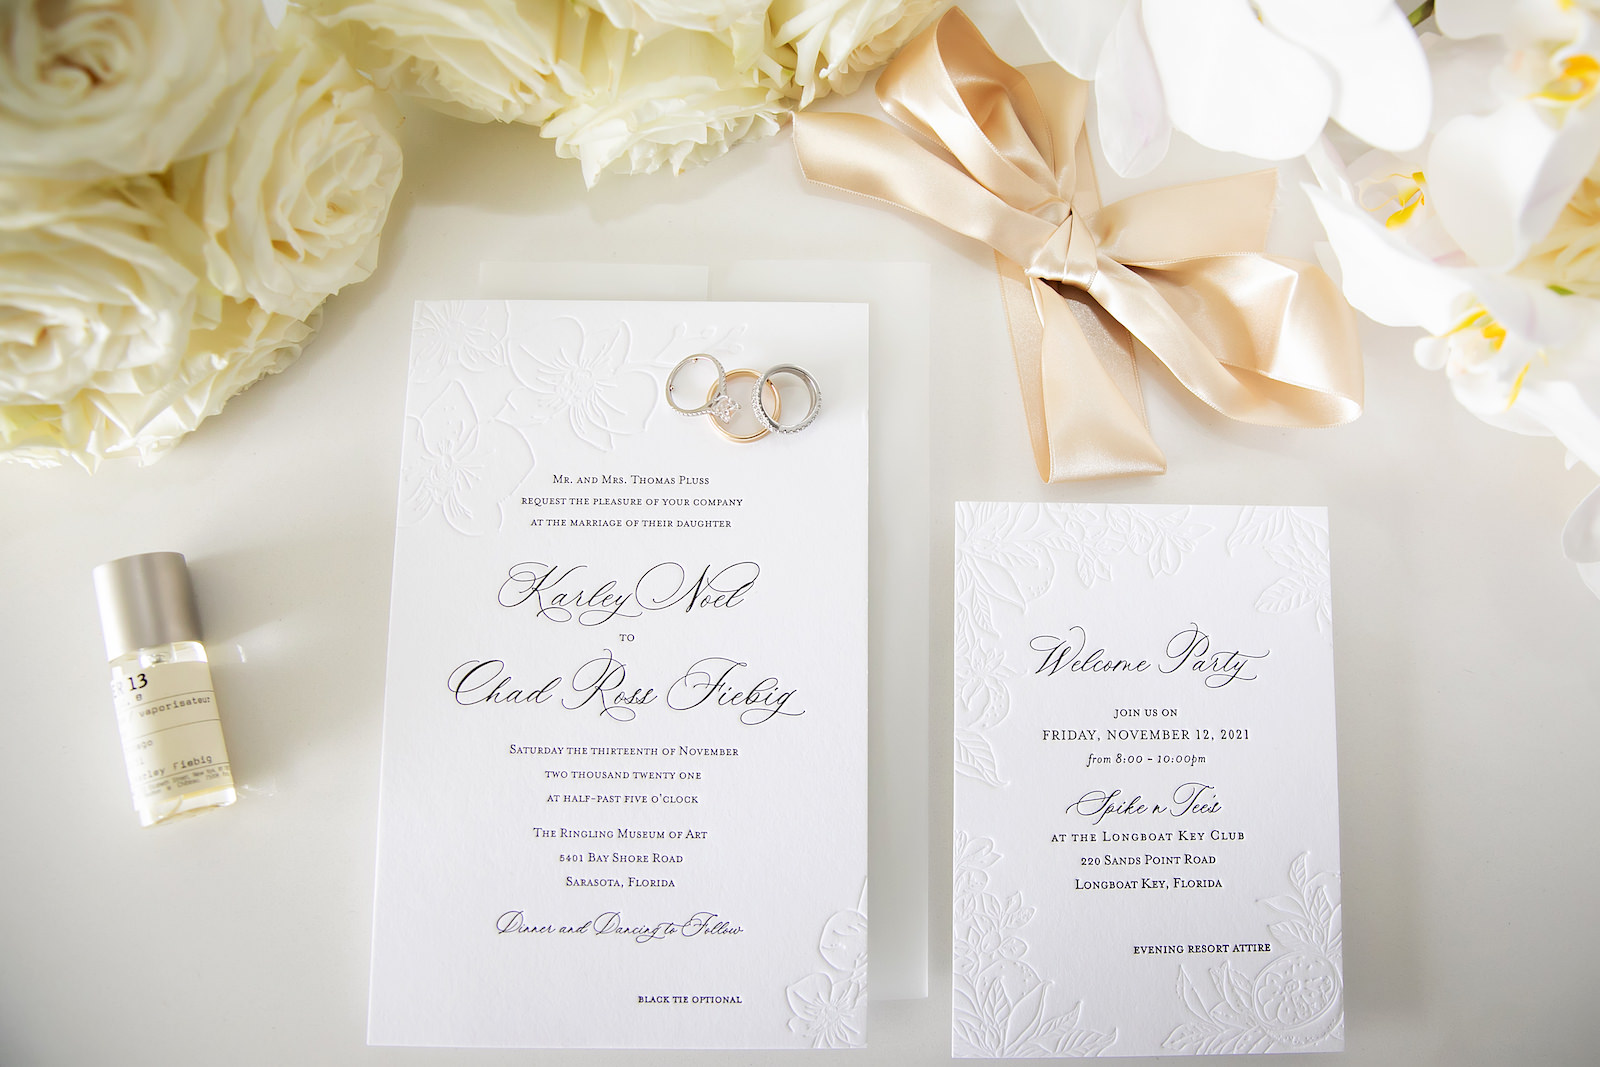 Black and White Luxurious Letter Press Formal Wedding Invitation | Tampa Bay Wedding Stationery A&P Design Co | Sarasota Wedding Photographer Limelight Photography